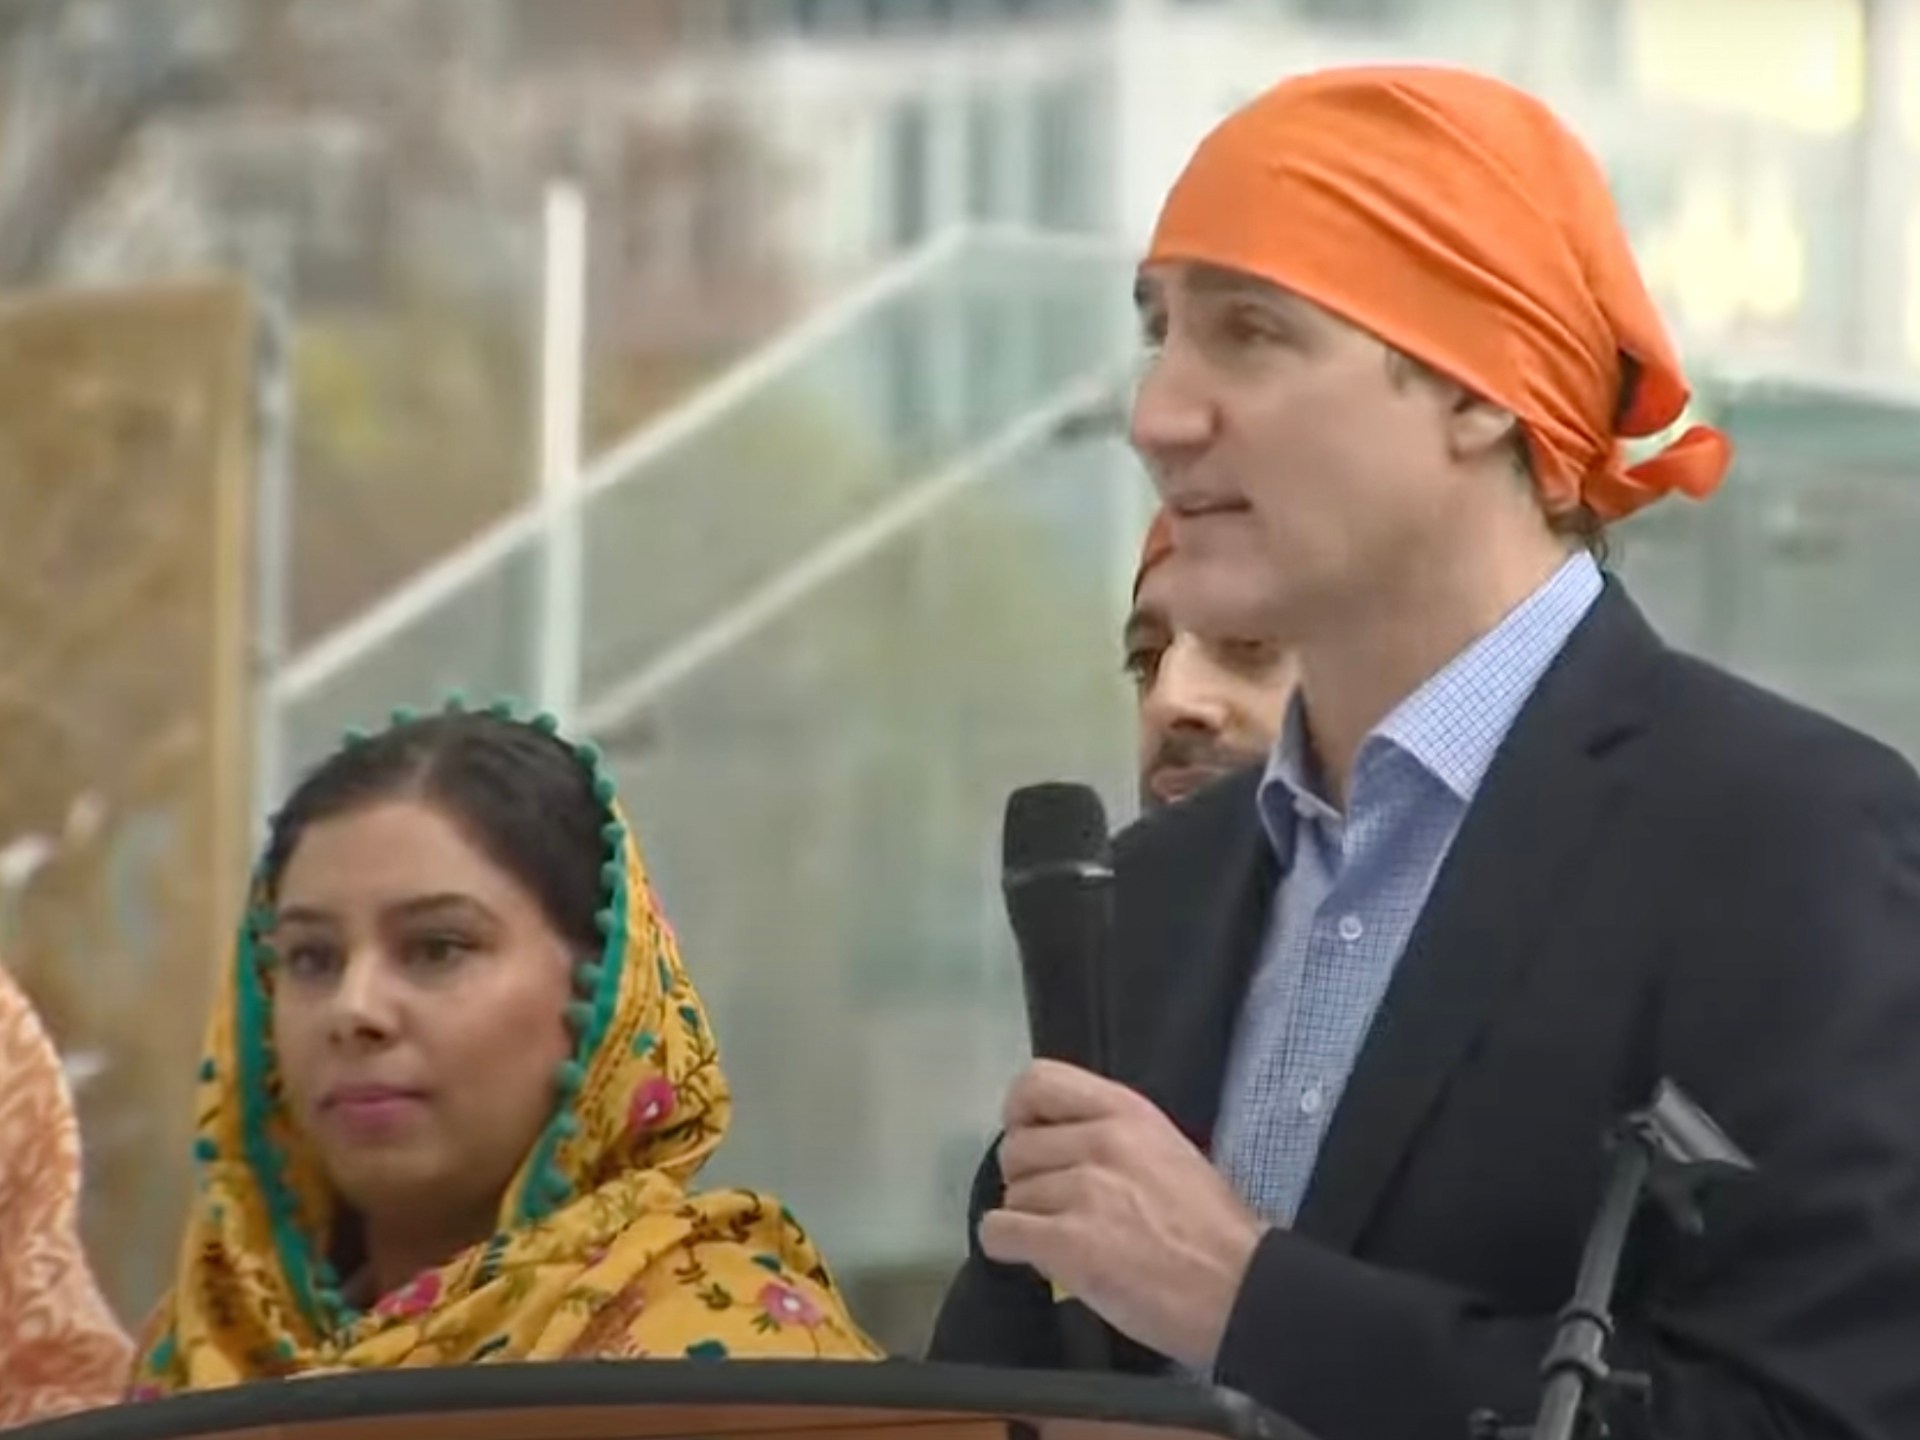 India protests alleged Sikh separatist slogans at event attended by Trudeau